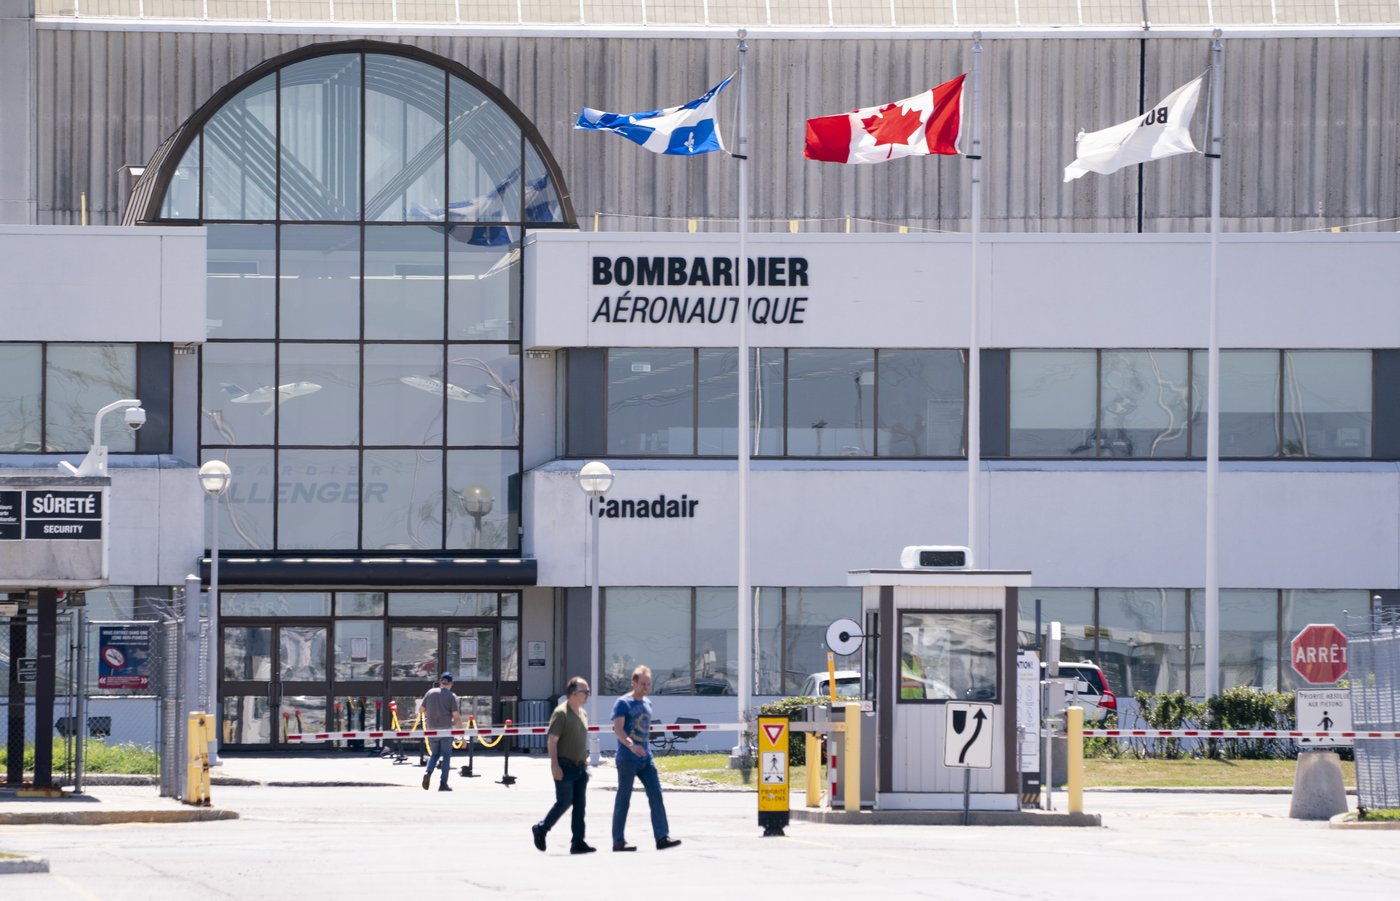 Union: Workers go on strike after no agreement with Bombardier could be reached by deadline